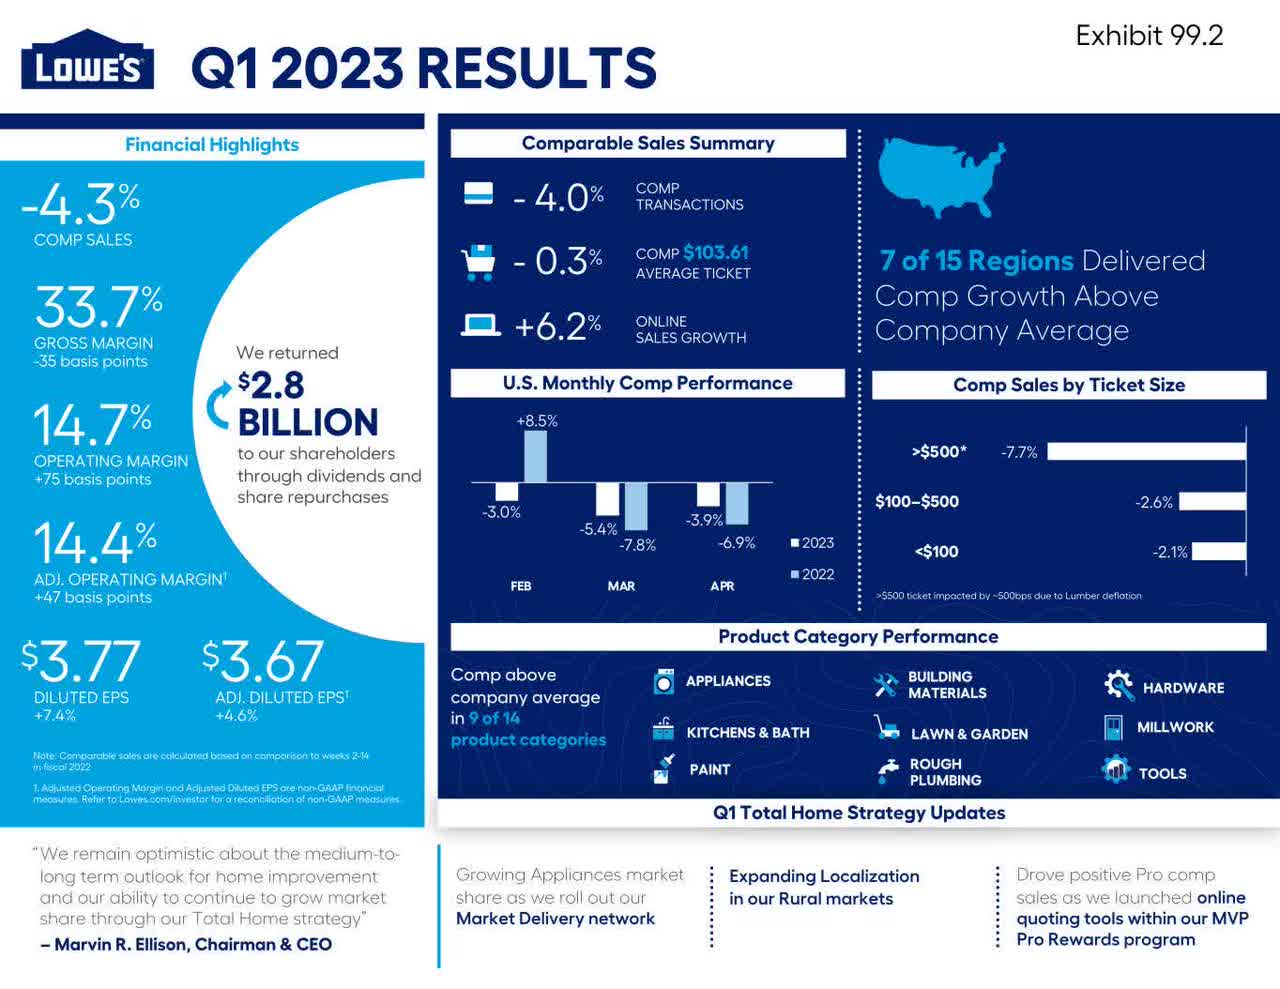 Graphic showing Q1 2023 results from Lowe's company